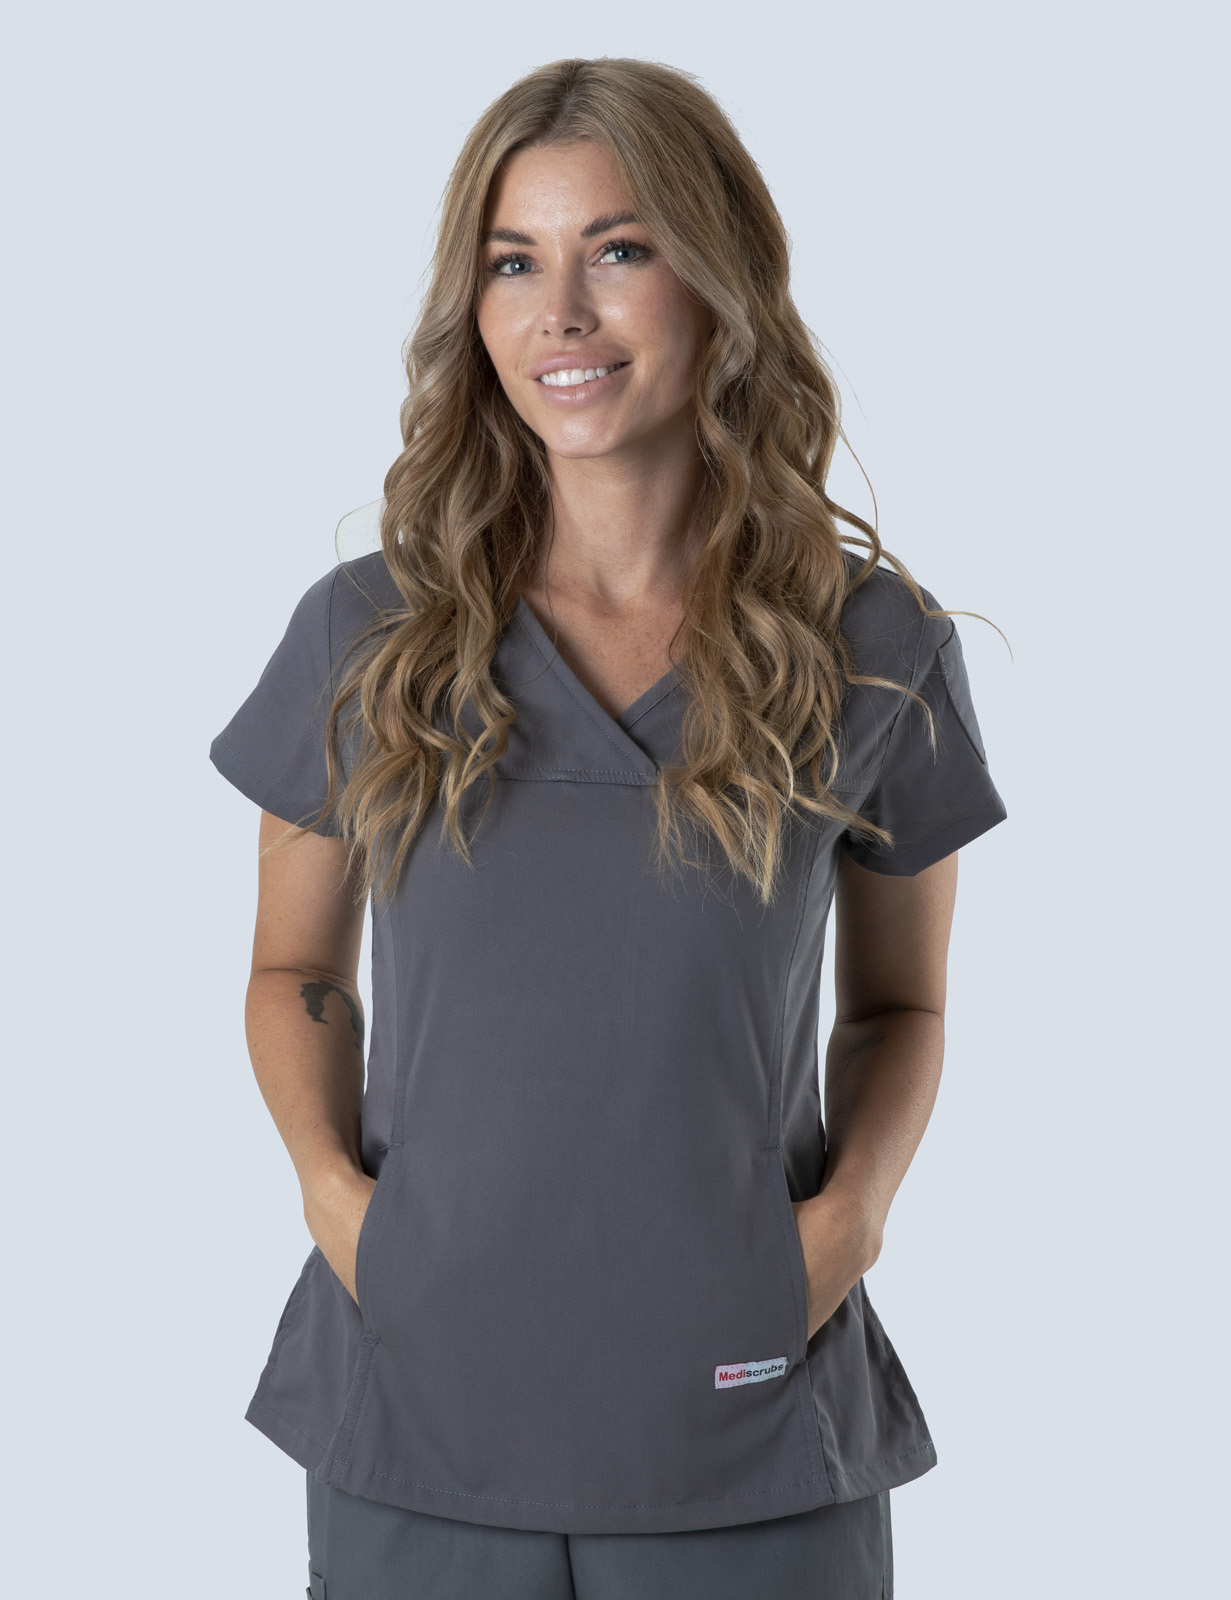 Caloundra Hospital - RN Emergency (Women's Fit Solid Scrub Top and Cargo Pants in Steel Grey incl Logos)